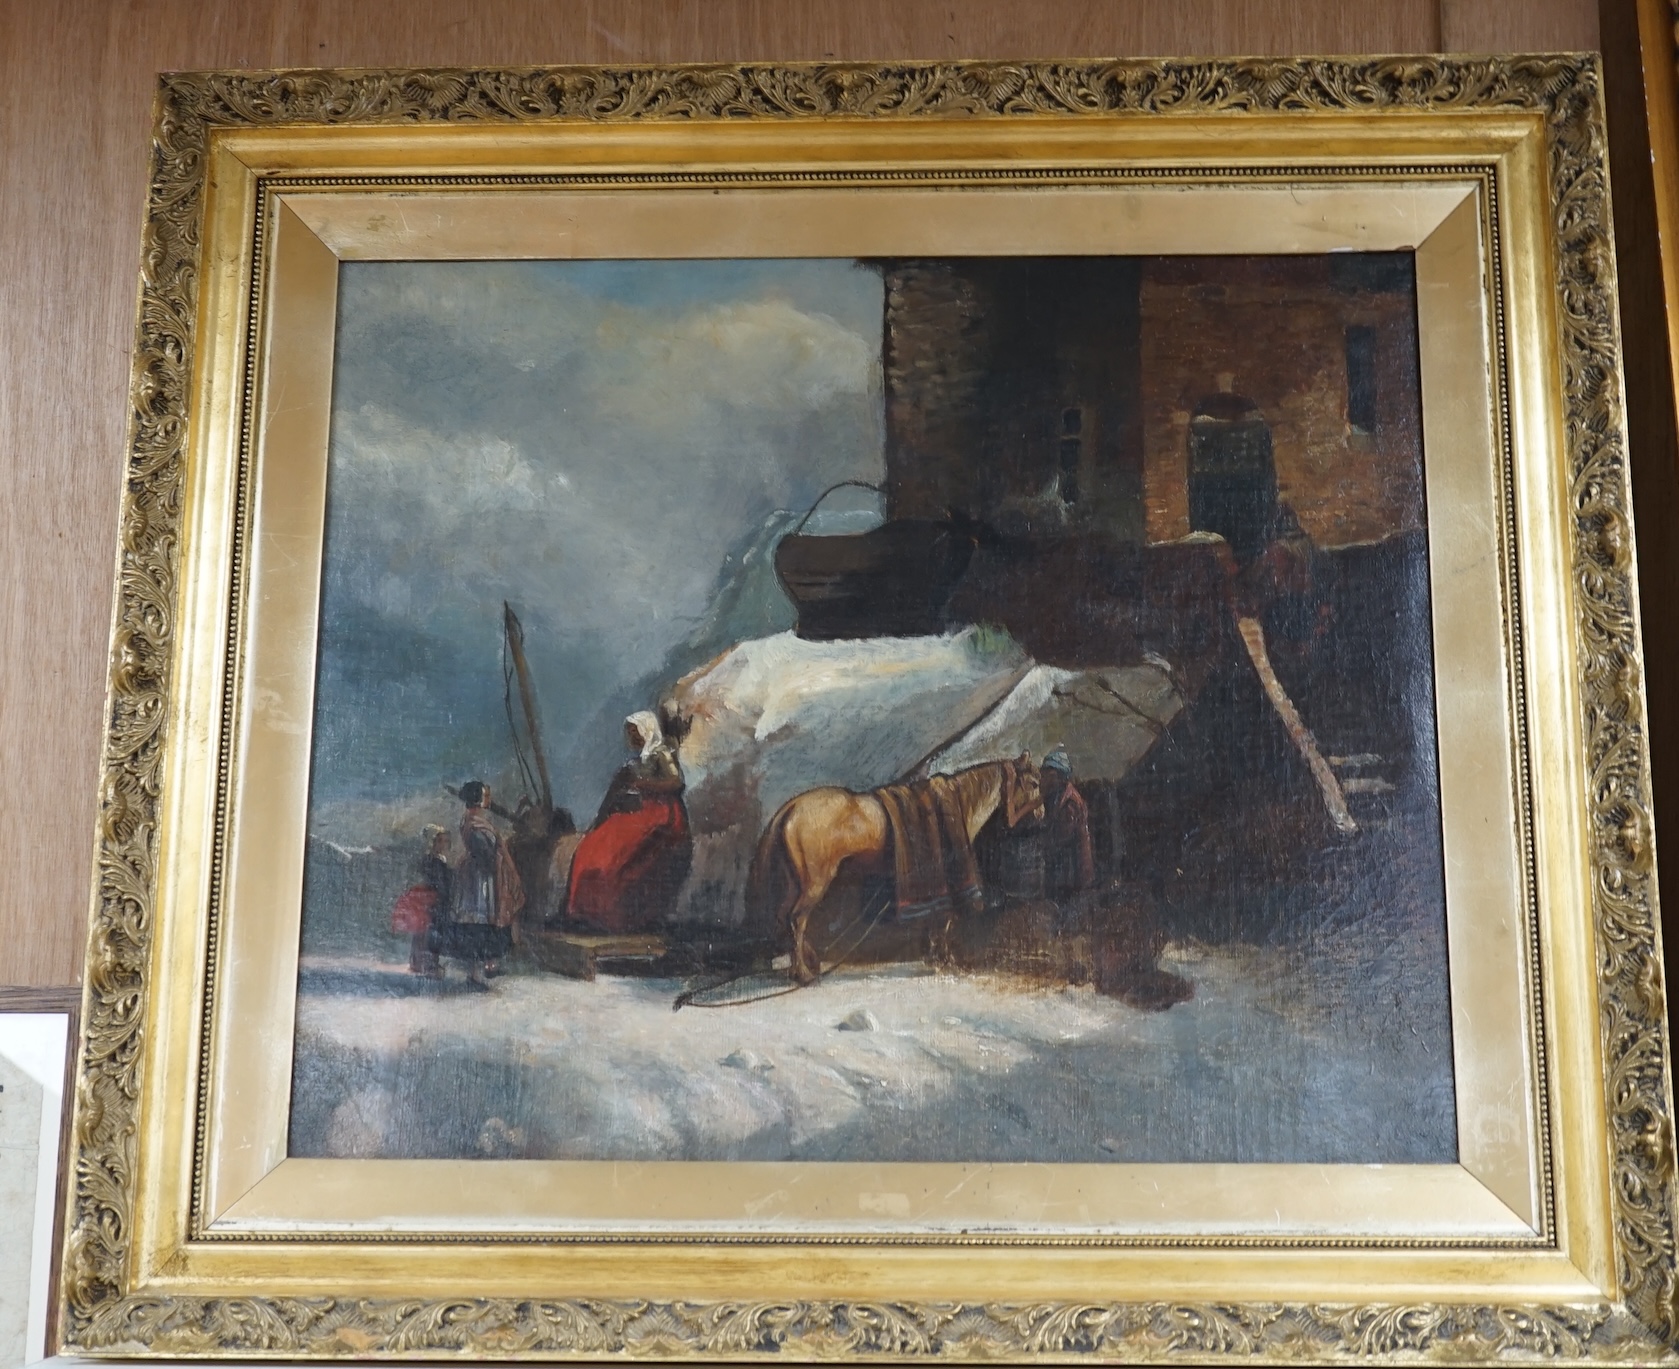 Late 19th century, oil on canvas, Figures and resting horse before buildings, unsigned, 44 x 53cm. Condition - fair to good